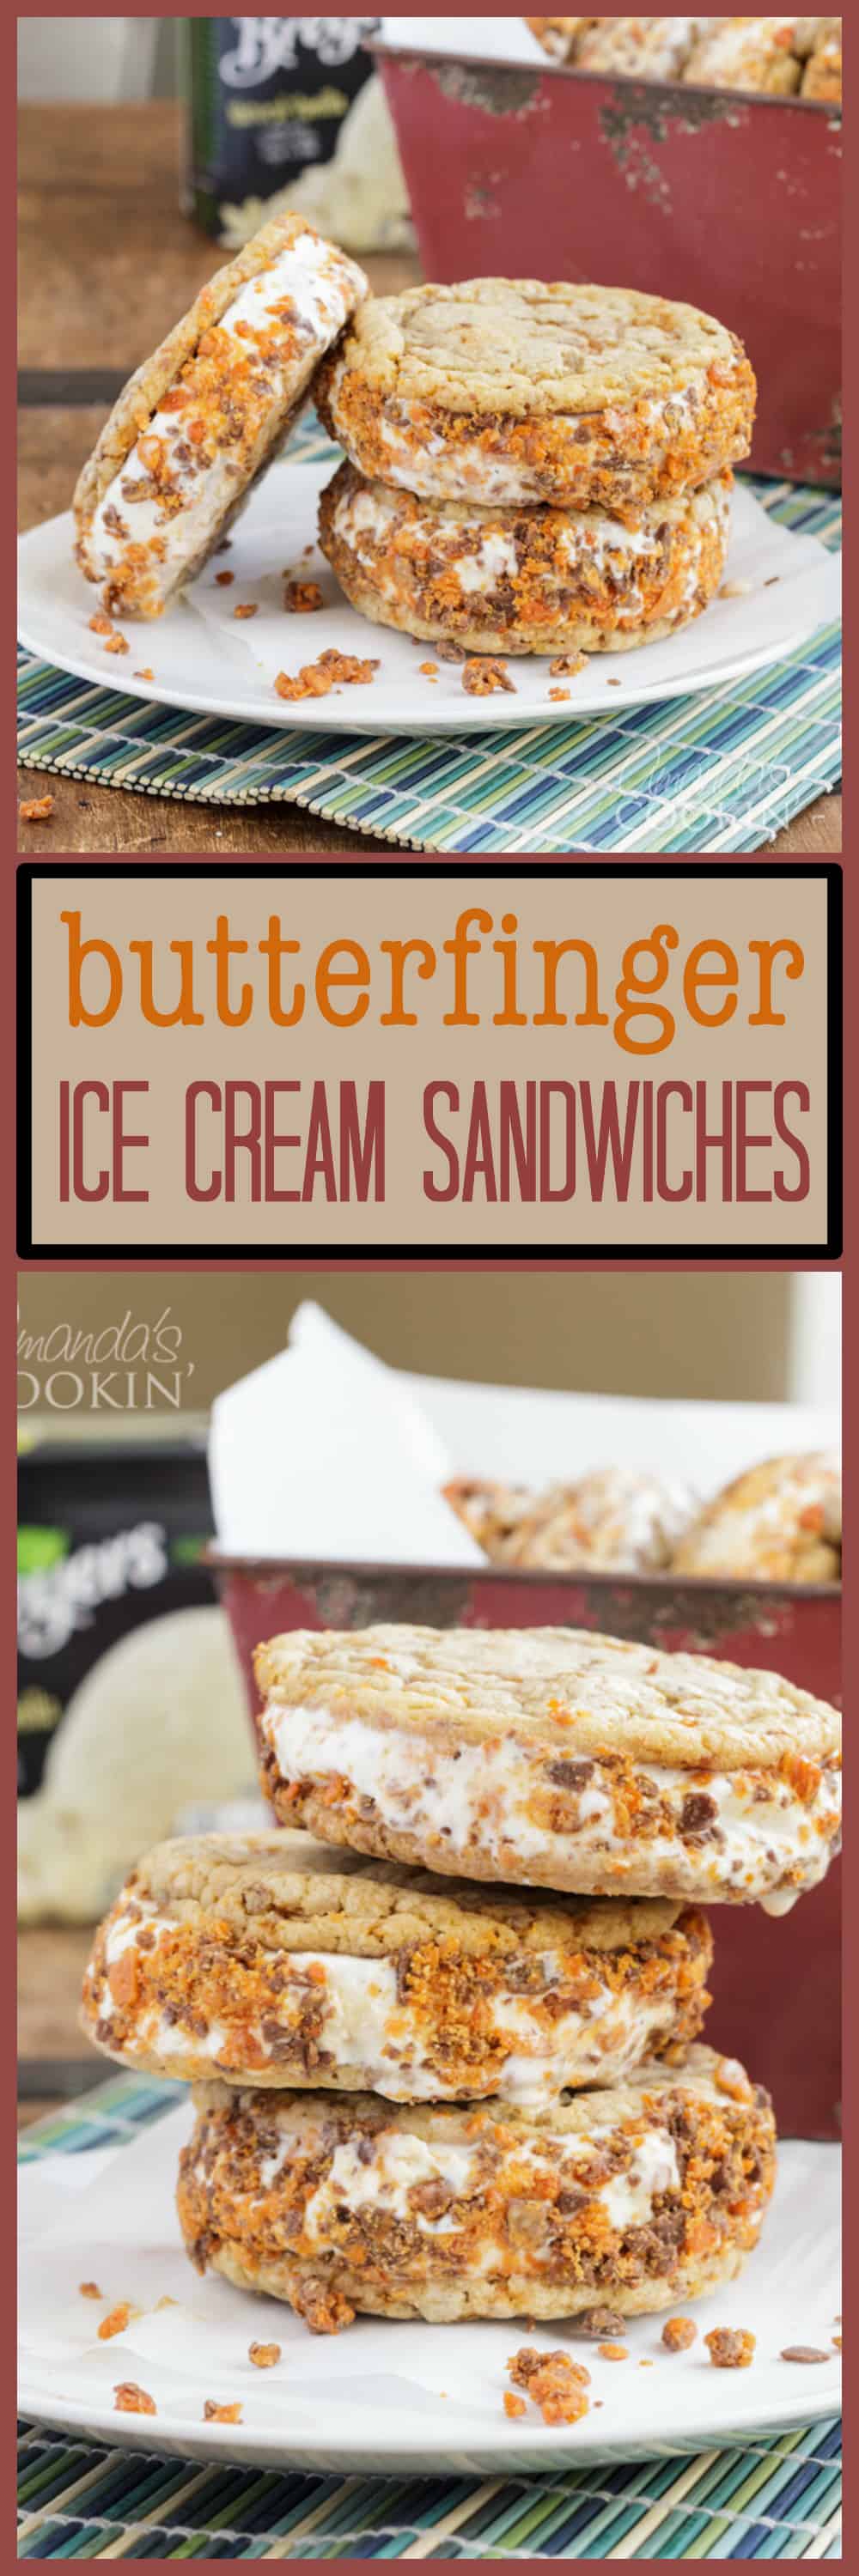 pinterst image with text butterfinger ice cream sandwiches